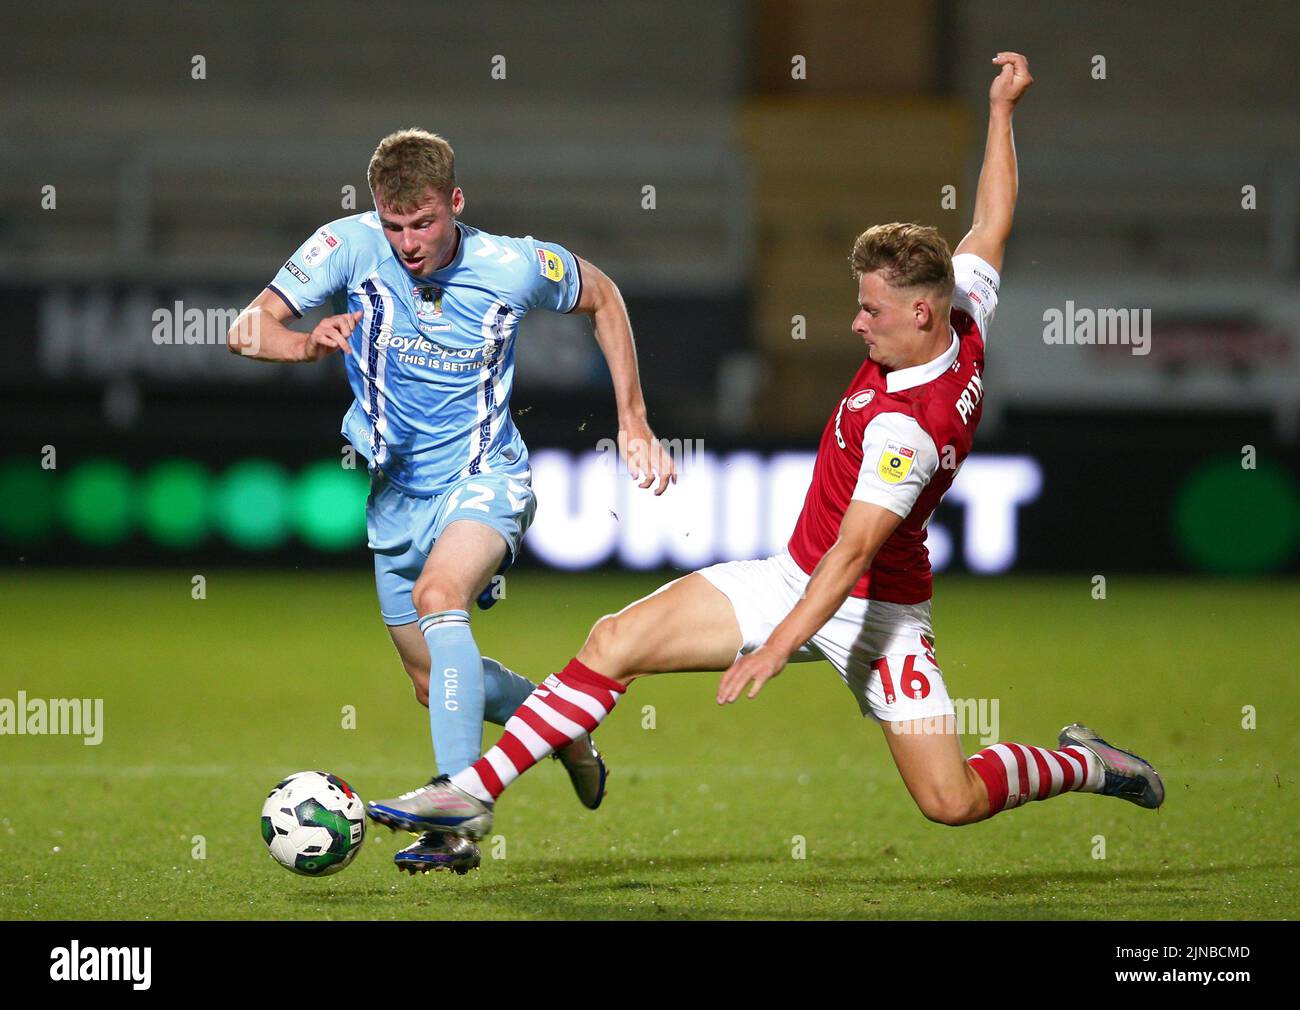 Coventry City's Jack Burroughs (left) and Bristol City's Cameron Pring battle for the ball during the Carabao Cup, first round match at the Pirelli Stadium, Burton upon Trent. Picture date: Wednesday August 10, 2022. Stock Photo